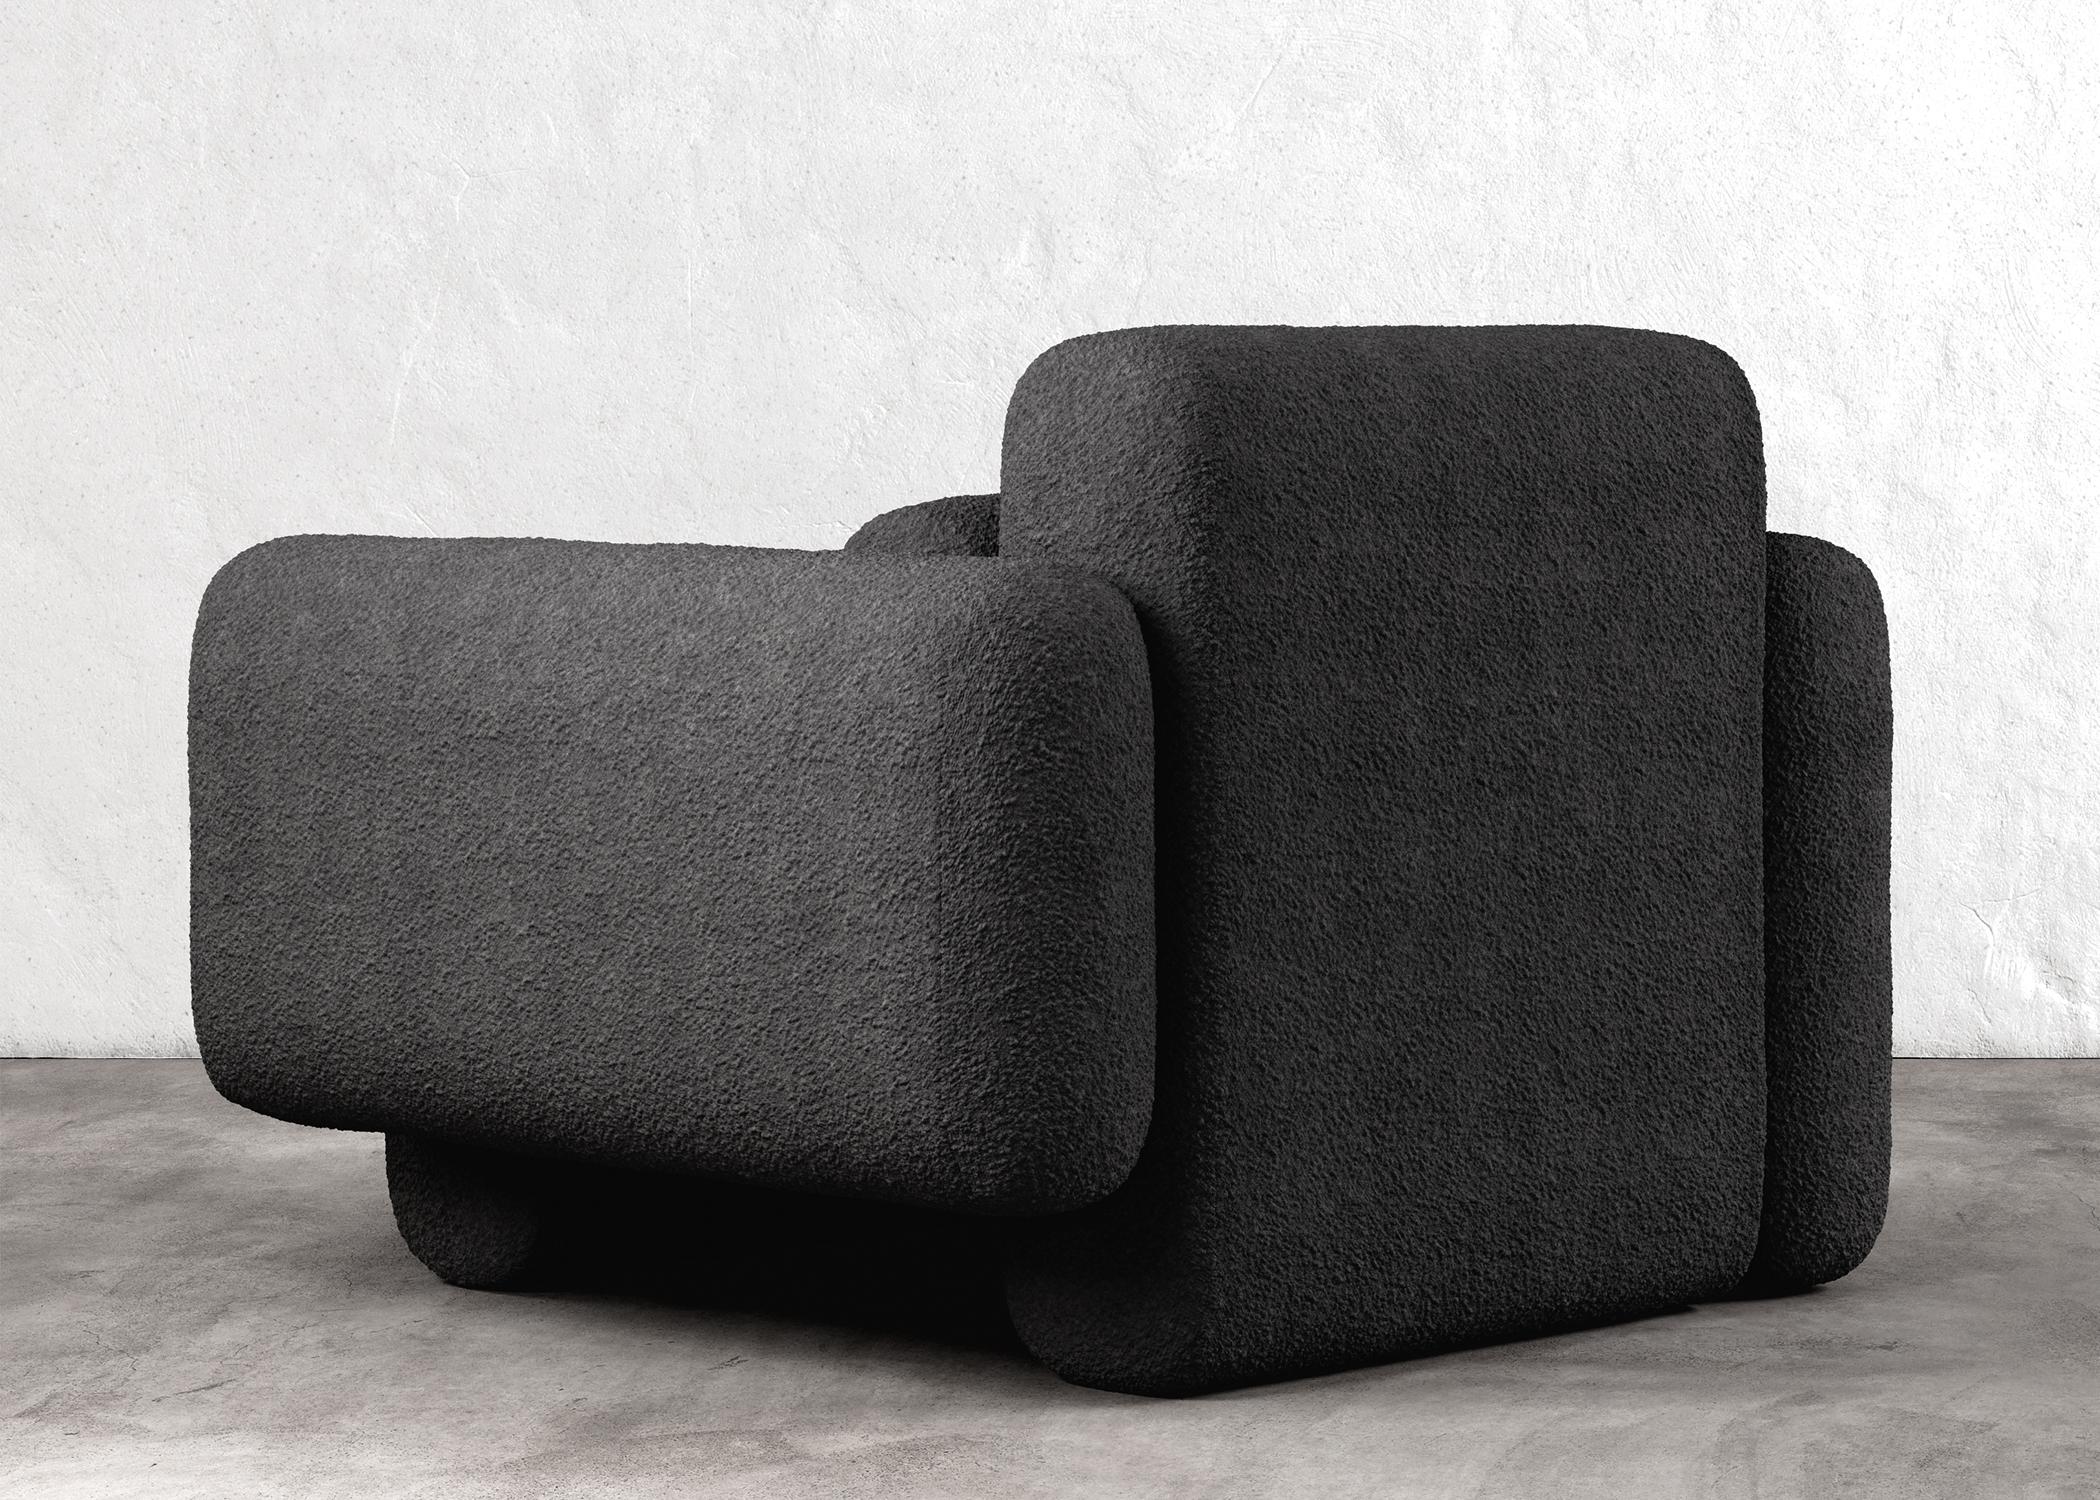 ASYM CHAIR - Modern Asymmetrical Sectional Chair in Black Boucle In New Condition For Sale In Laguna Niguel, CA